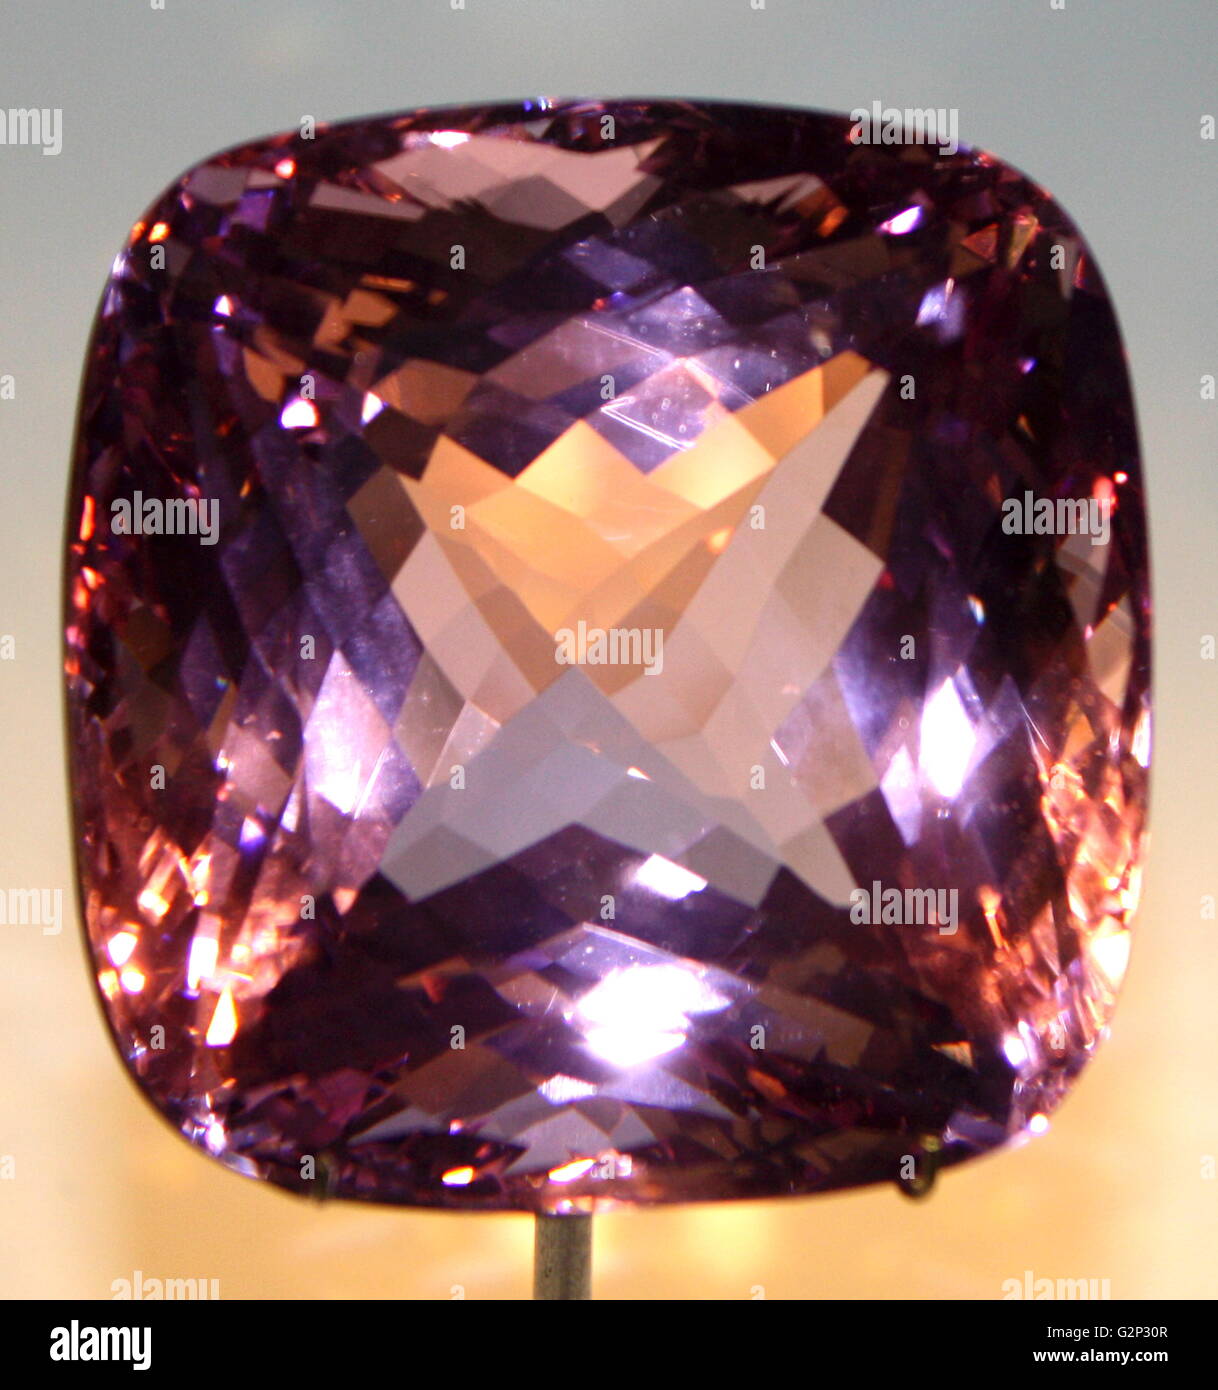 A flawless cut Morganite gem, (formerly called pink beryl until 1910). Found in Madagascar and cut to display it's brilliance and clarity. Stock Photo